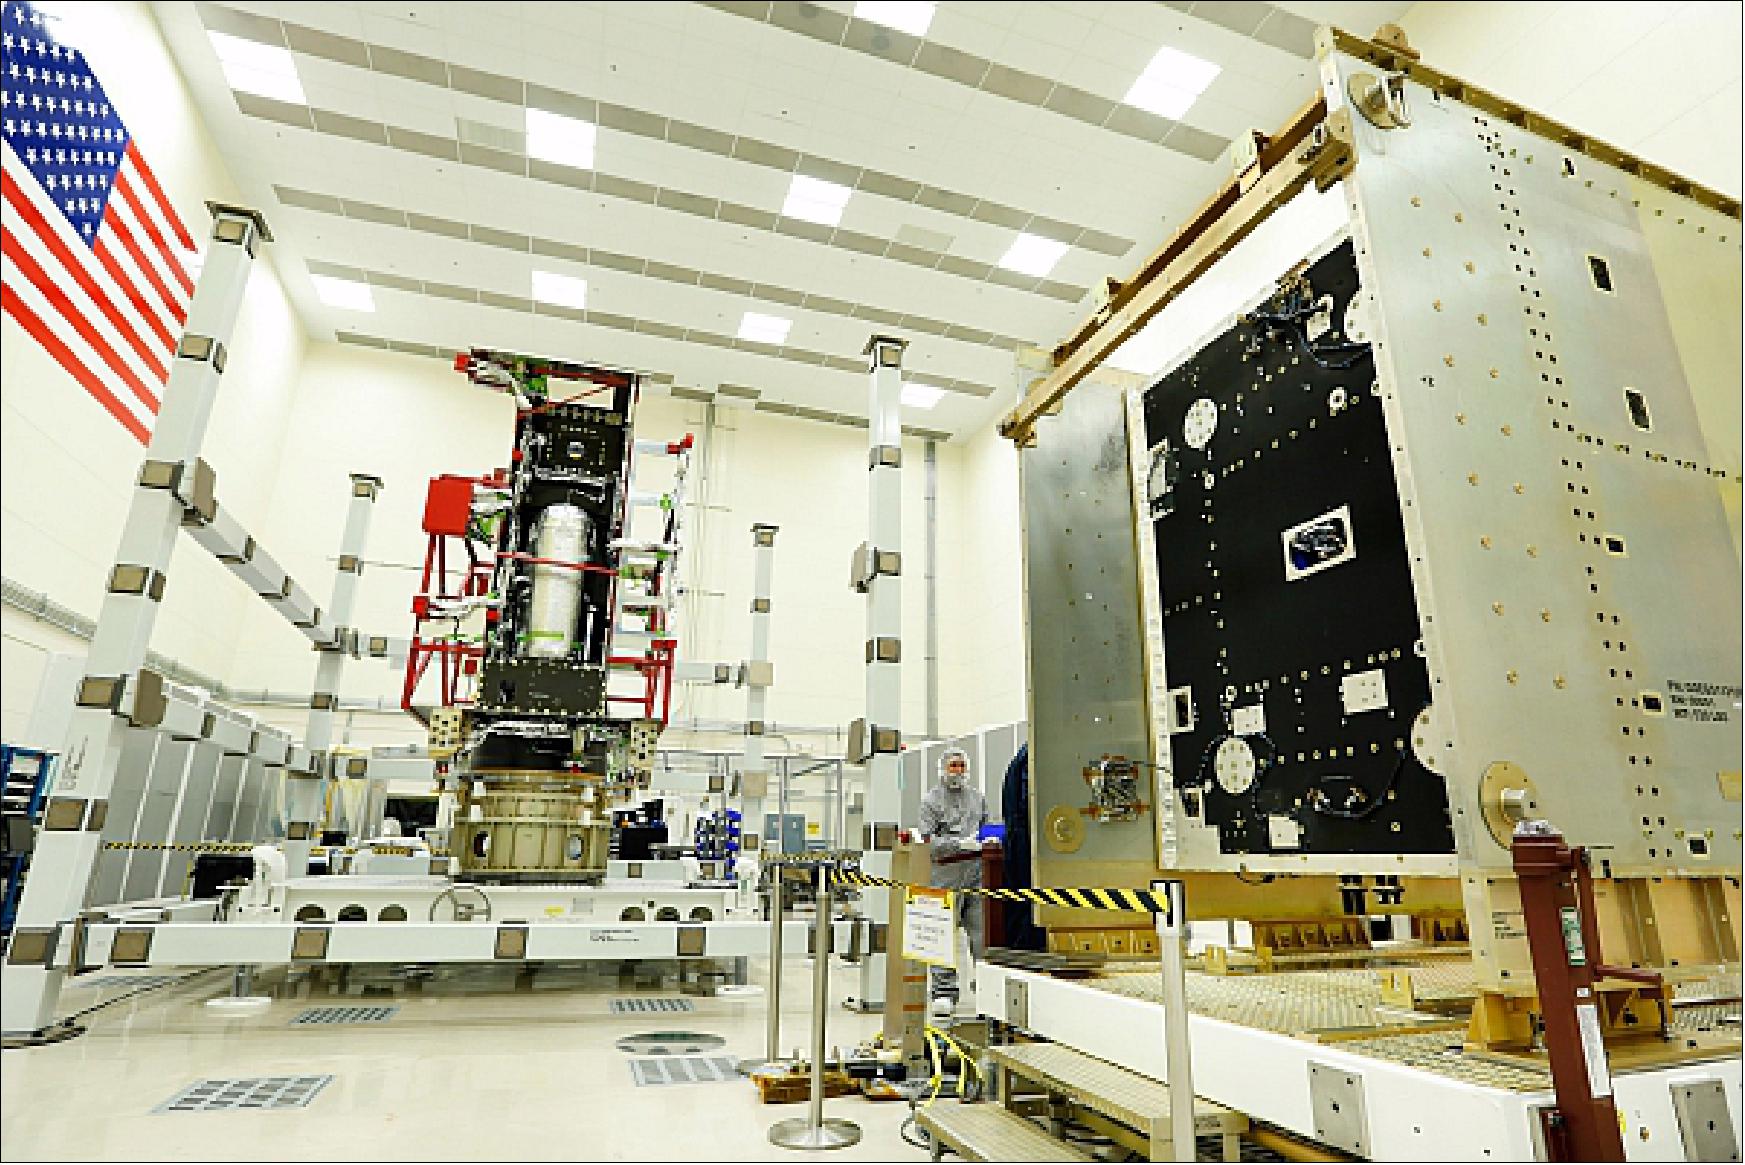 Figure 17: The Propulsion Module (left) and System Module (right) of the first GOES-R series weather satellite arrived in Lockheed Martin’s cleanroom near Denver where they will now undergo integration and testing (image credit: Lockheed Martin)